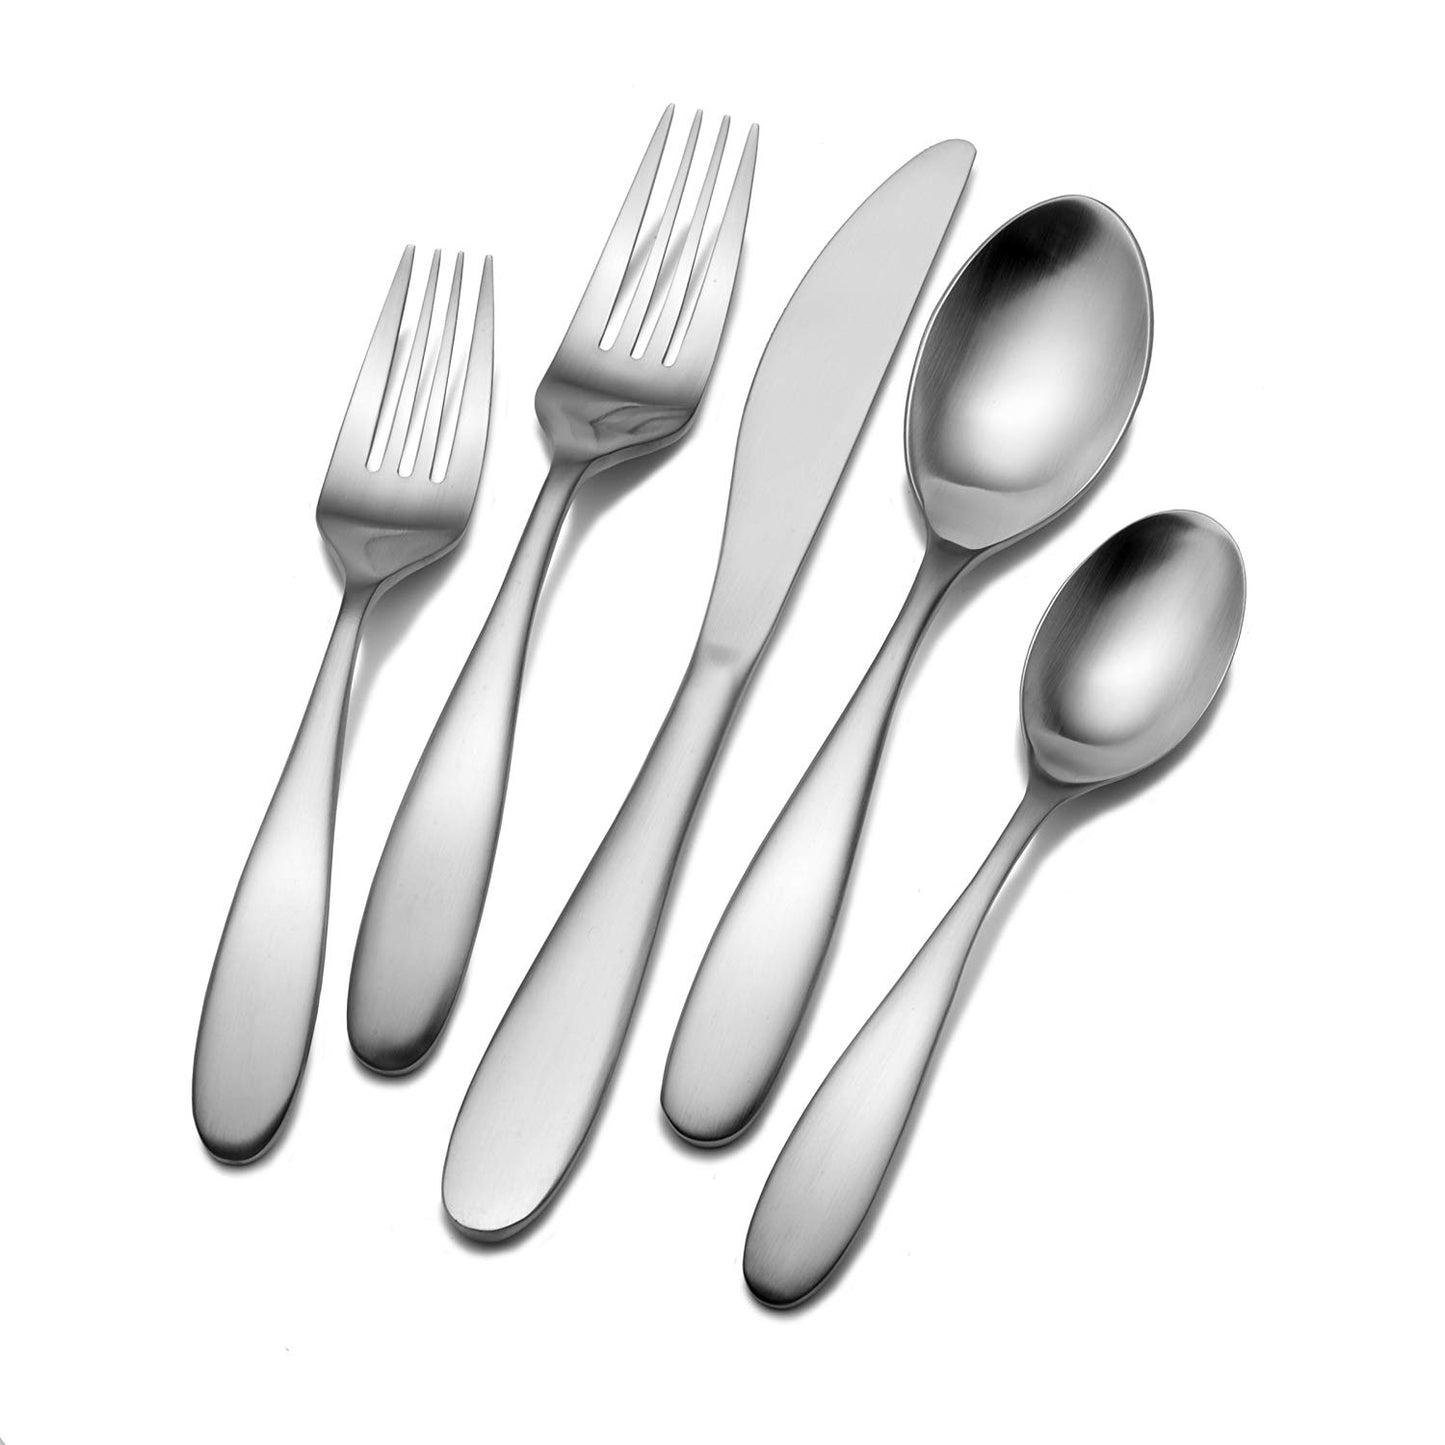 Towle Living Alpine 42-Piece Flatware Set, Service for 8, Stainless Steel